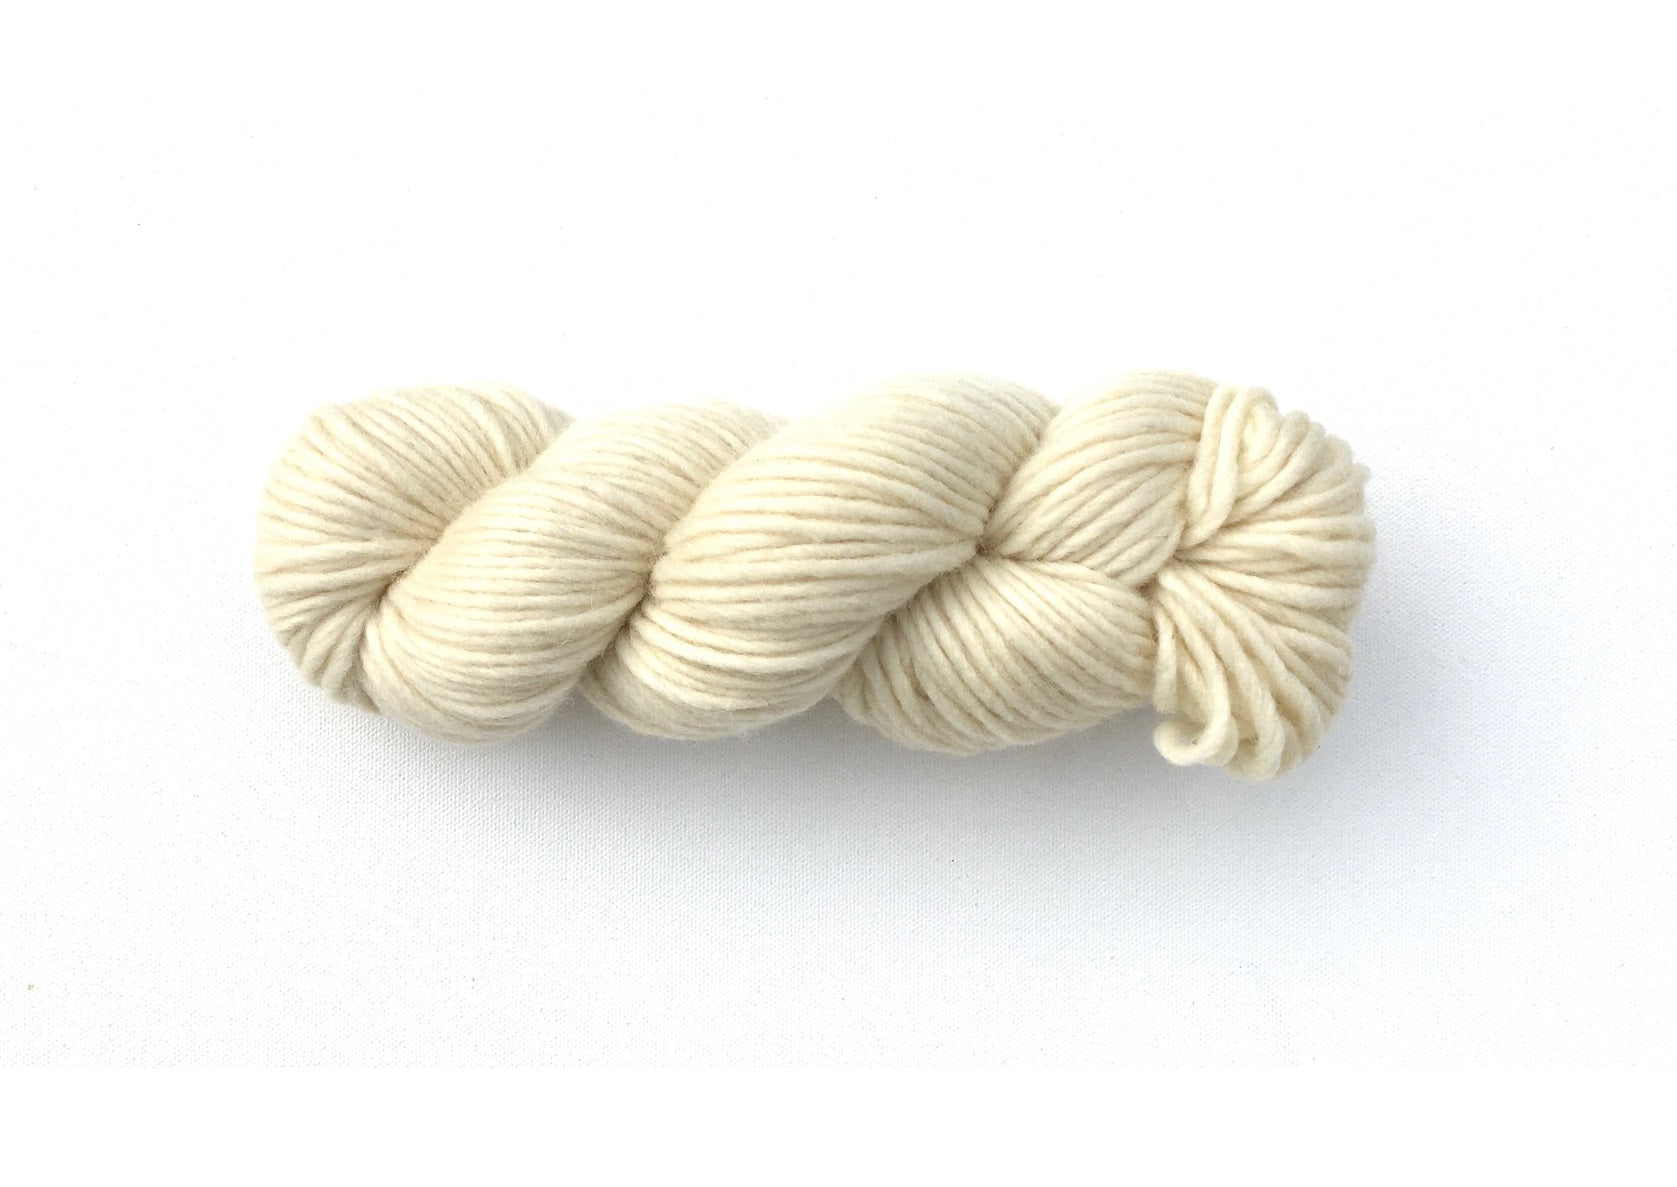 One hank of Roram Bulky yarn in natural cream colour